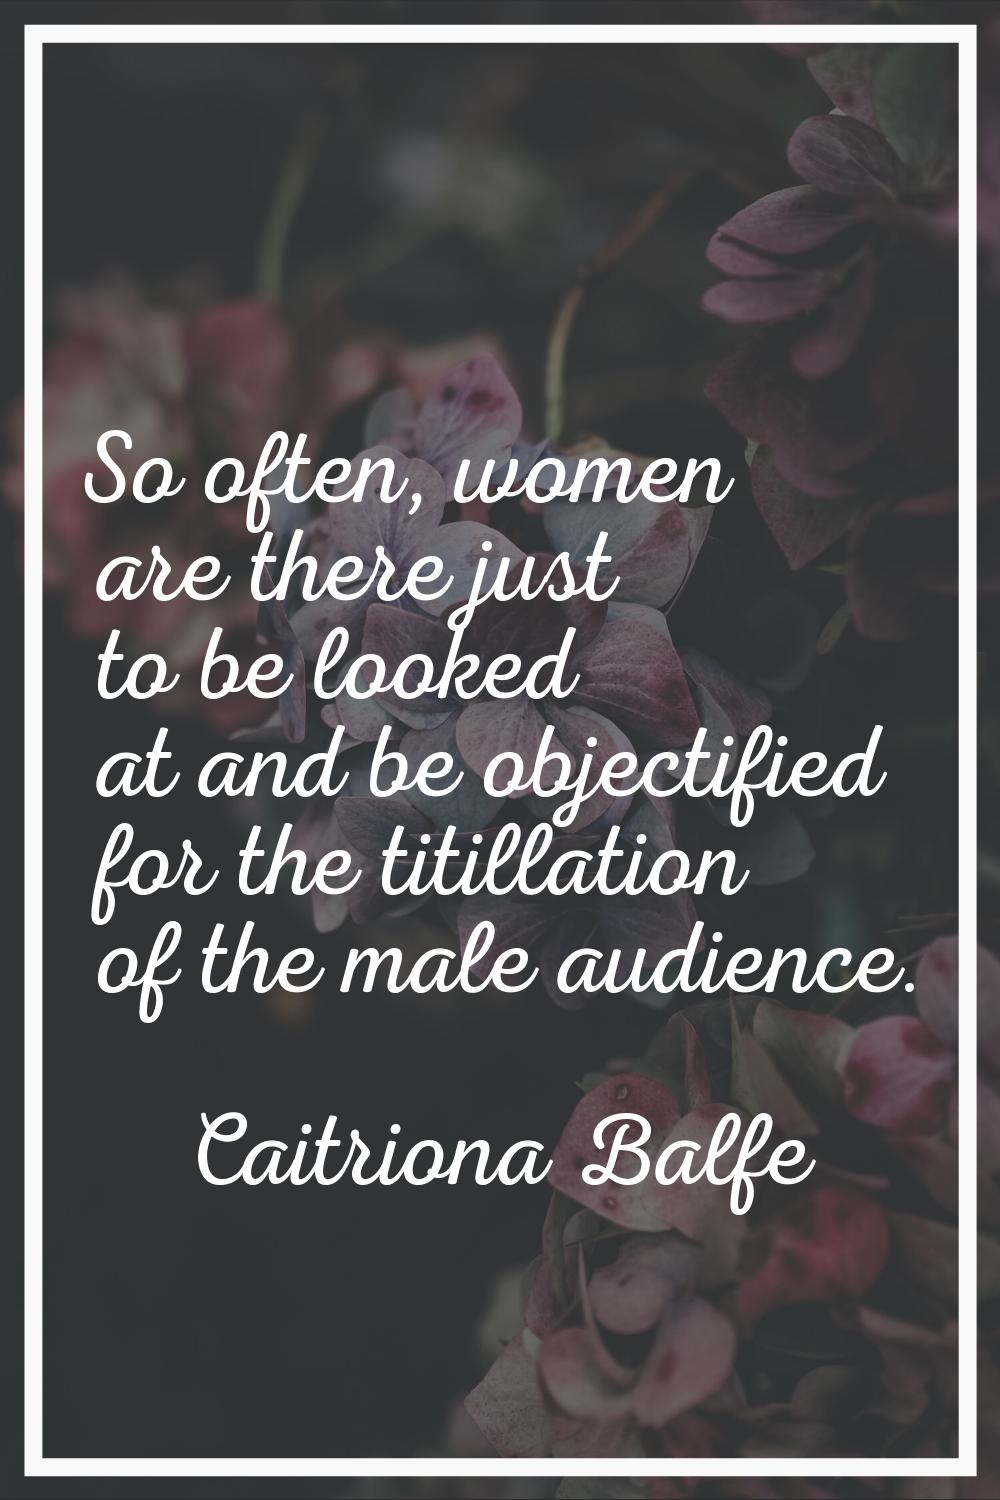 So often, women are there just to be looked at and be objectified for the titillation of the male a